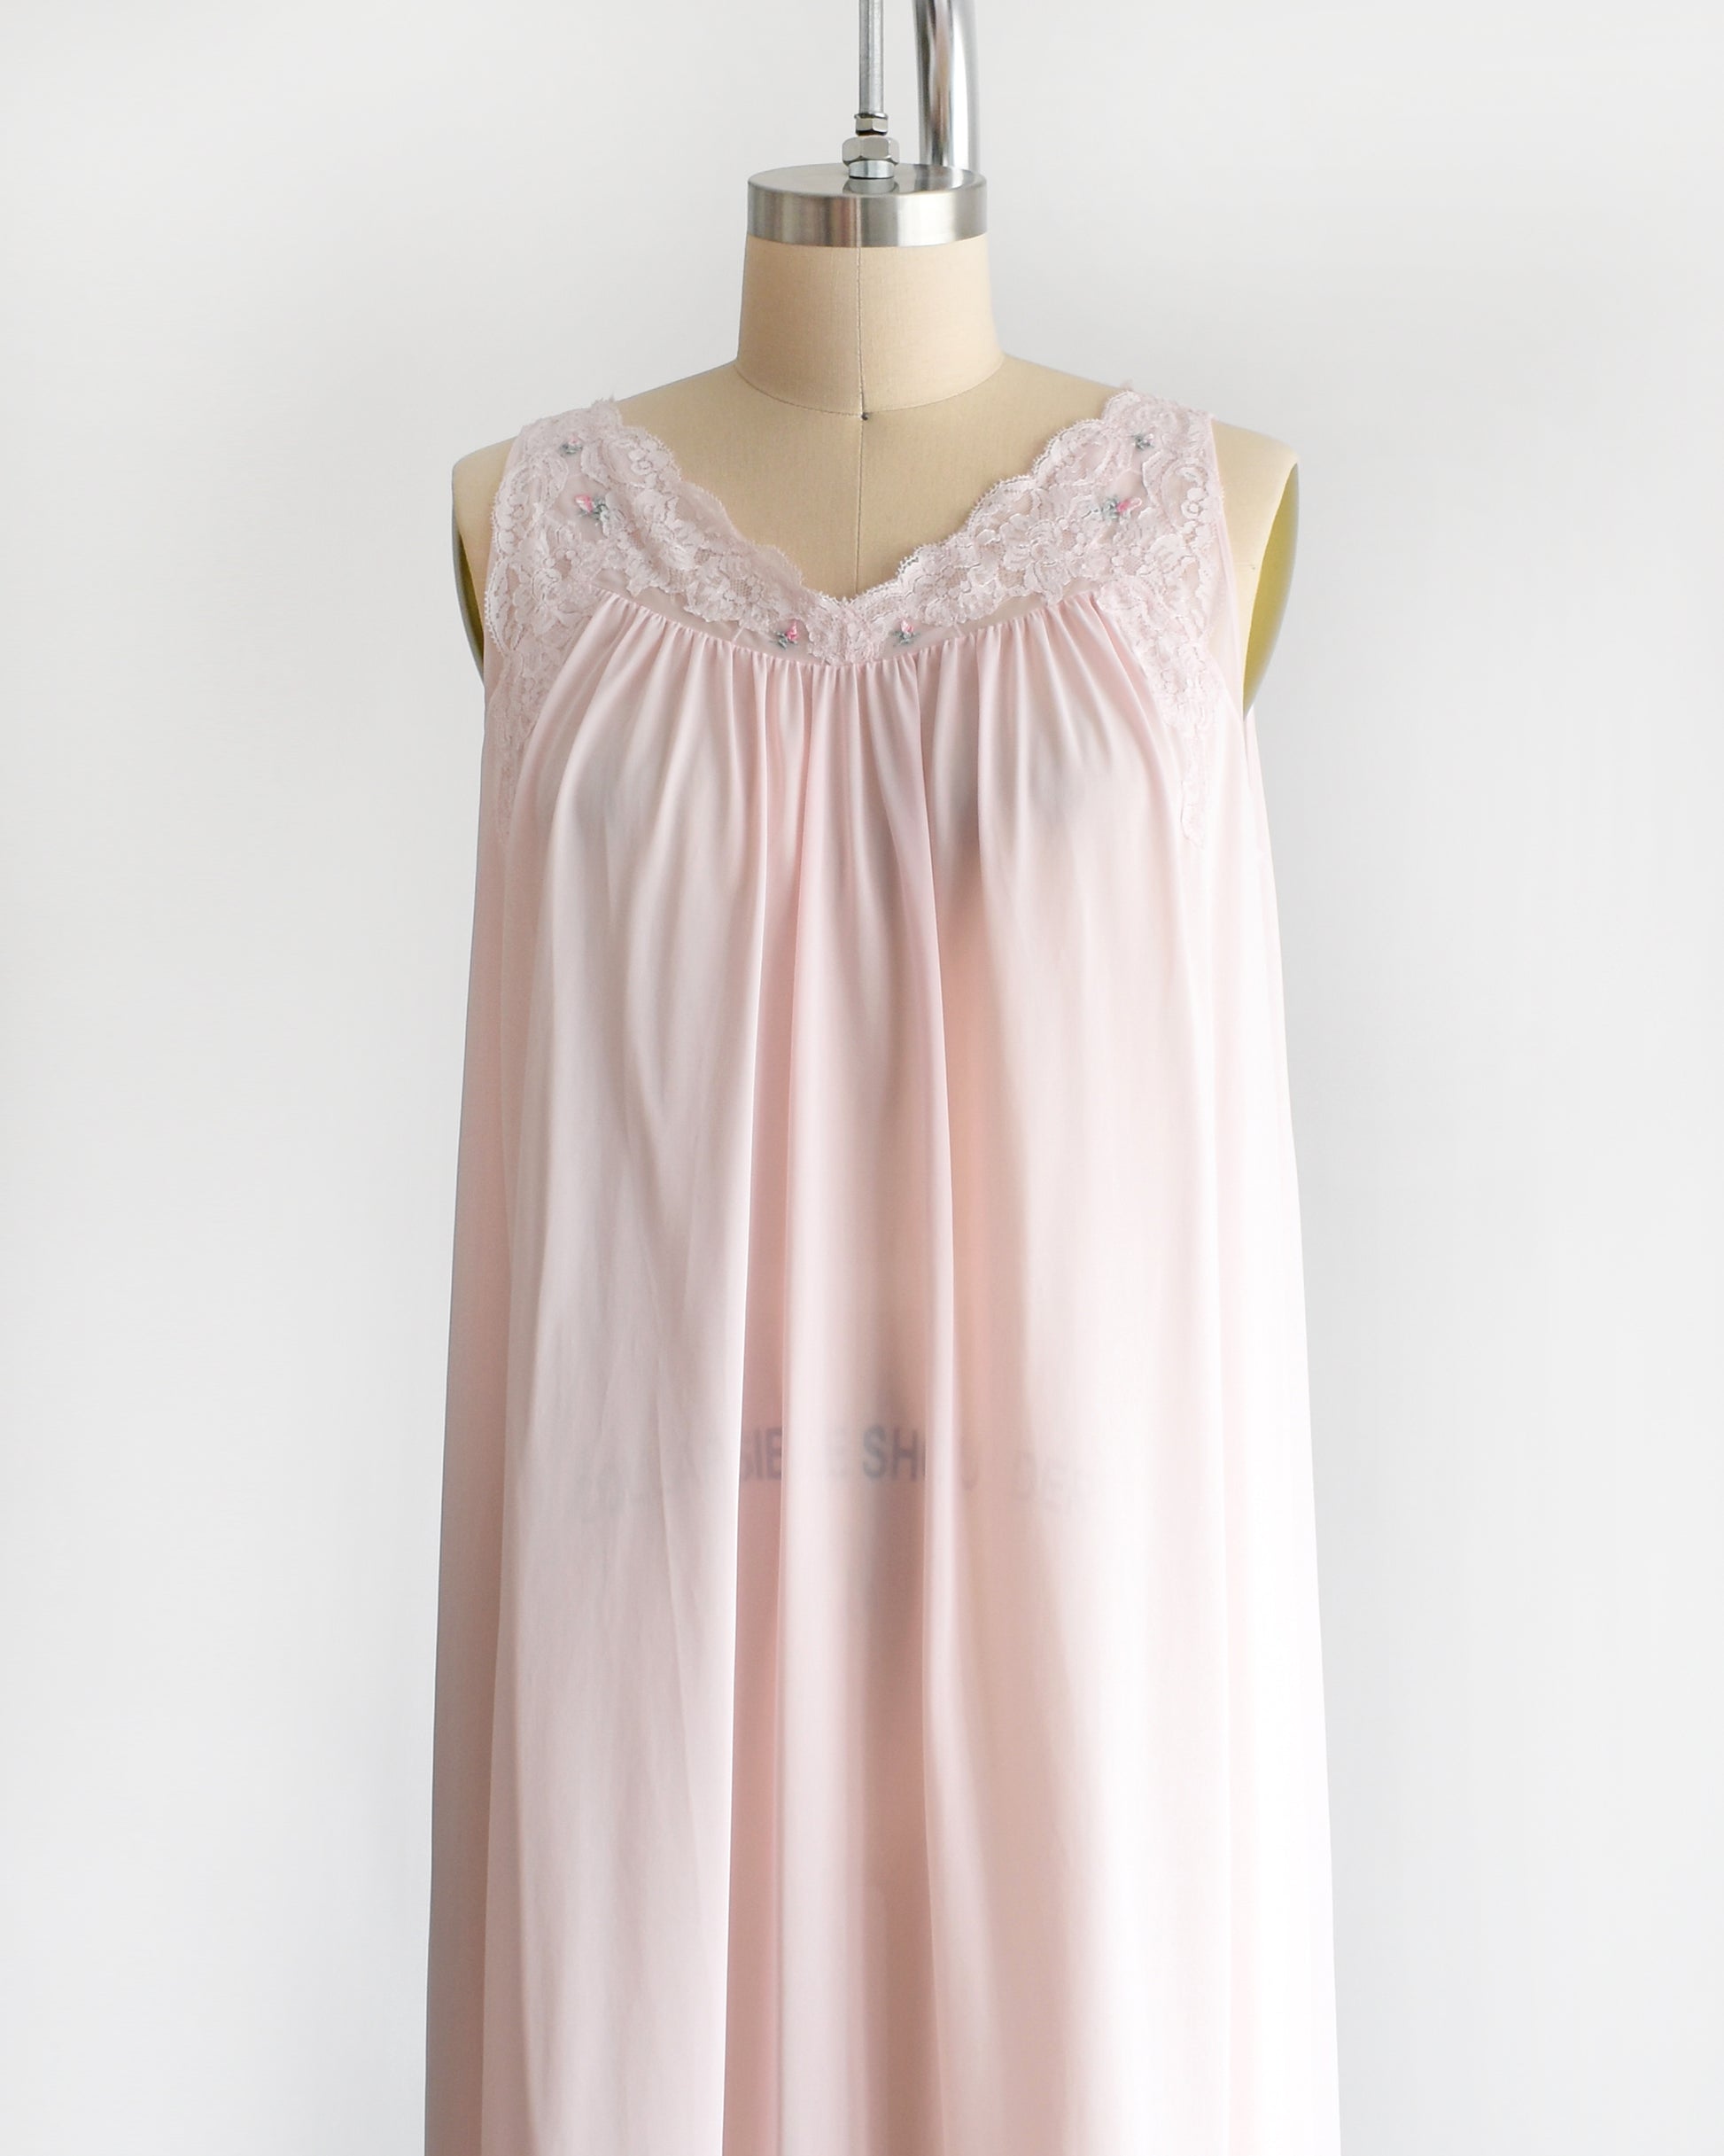 Side front view of a vintage 1970s pink babydoll nightie which has a lace v-neckline that's adorned with lace and has small embroidered flowers on the front.